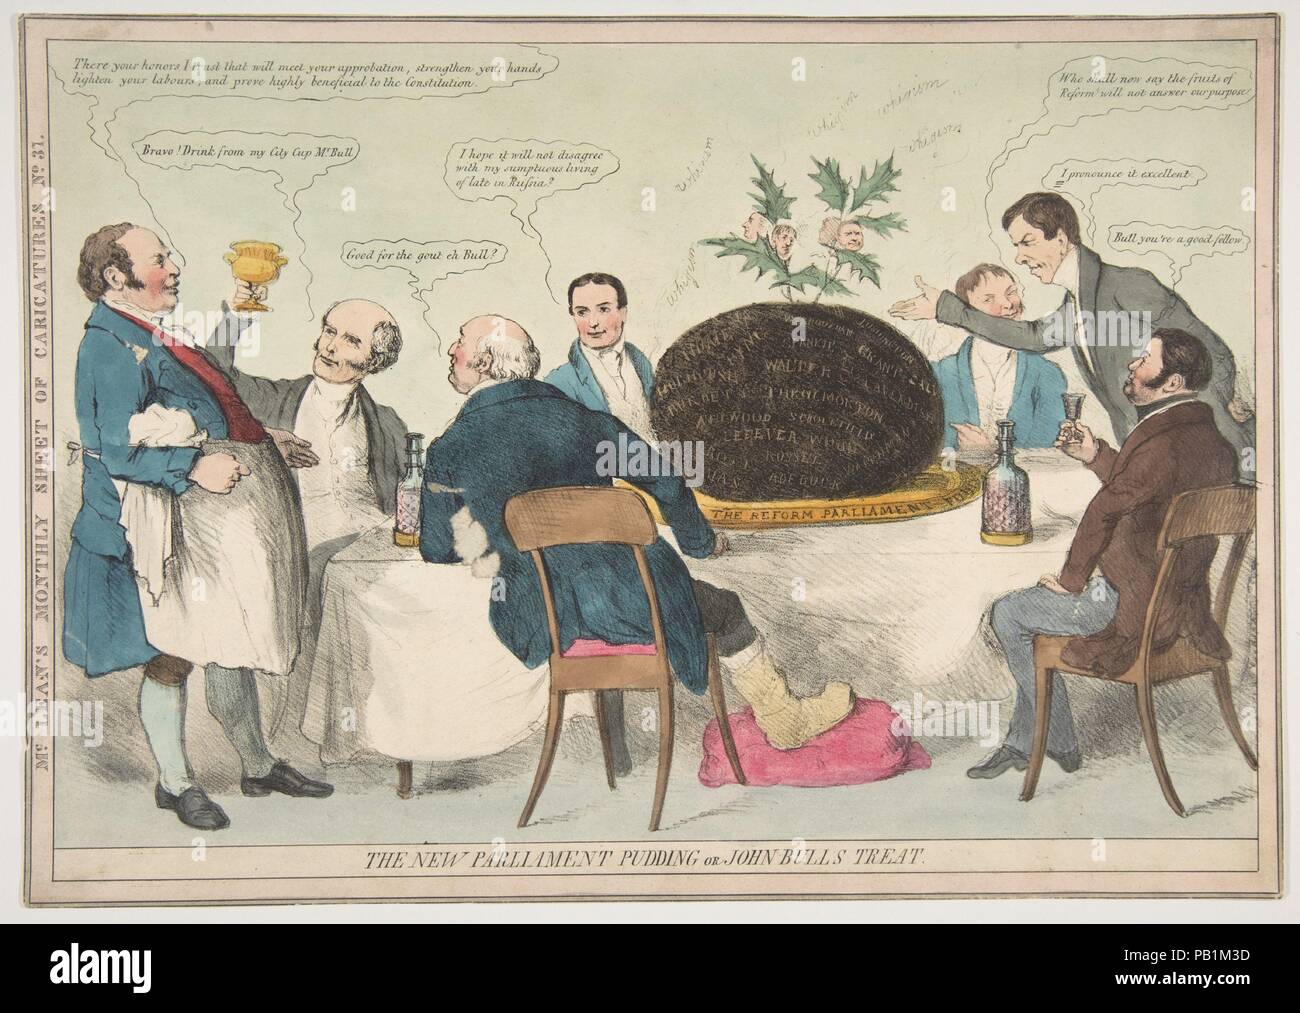 The New Parliament Pudding or John Bull's Treat. Artist: Anonymous, British, 19th century. Dimensions: sheet: 9 15/16 x 14 1/16 in. (25.2 x 35.7 cm). Publisher: Thomas McLean (British, active London 1788-1885). Date: ca. 1832.  John Bull stands at left, while a group of men sit around a table on which rests a huge pudding. Its platter is labeled: 'The Reform Parliament'. From the pudding rises a steam of 'Whiggism'. Holly leaves stuck in its top contain the faces of politicians. Museum: Metropolitan Museum of Art, New York, USA. Stock Photo